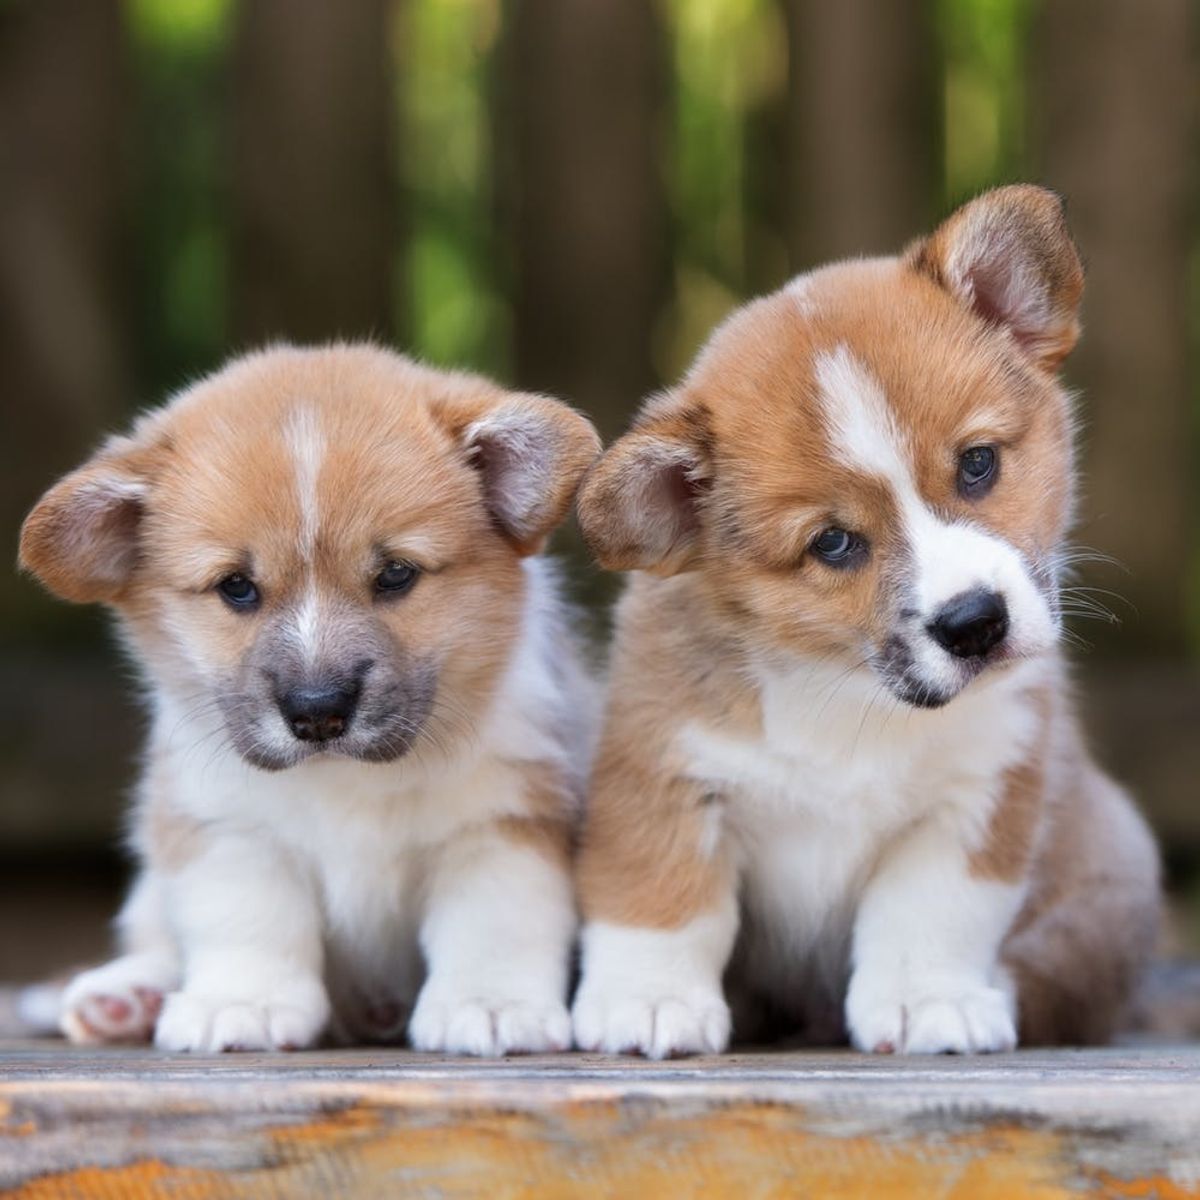 Here’s How Looking at Puppy Pictures Can Help Your Relationship